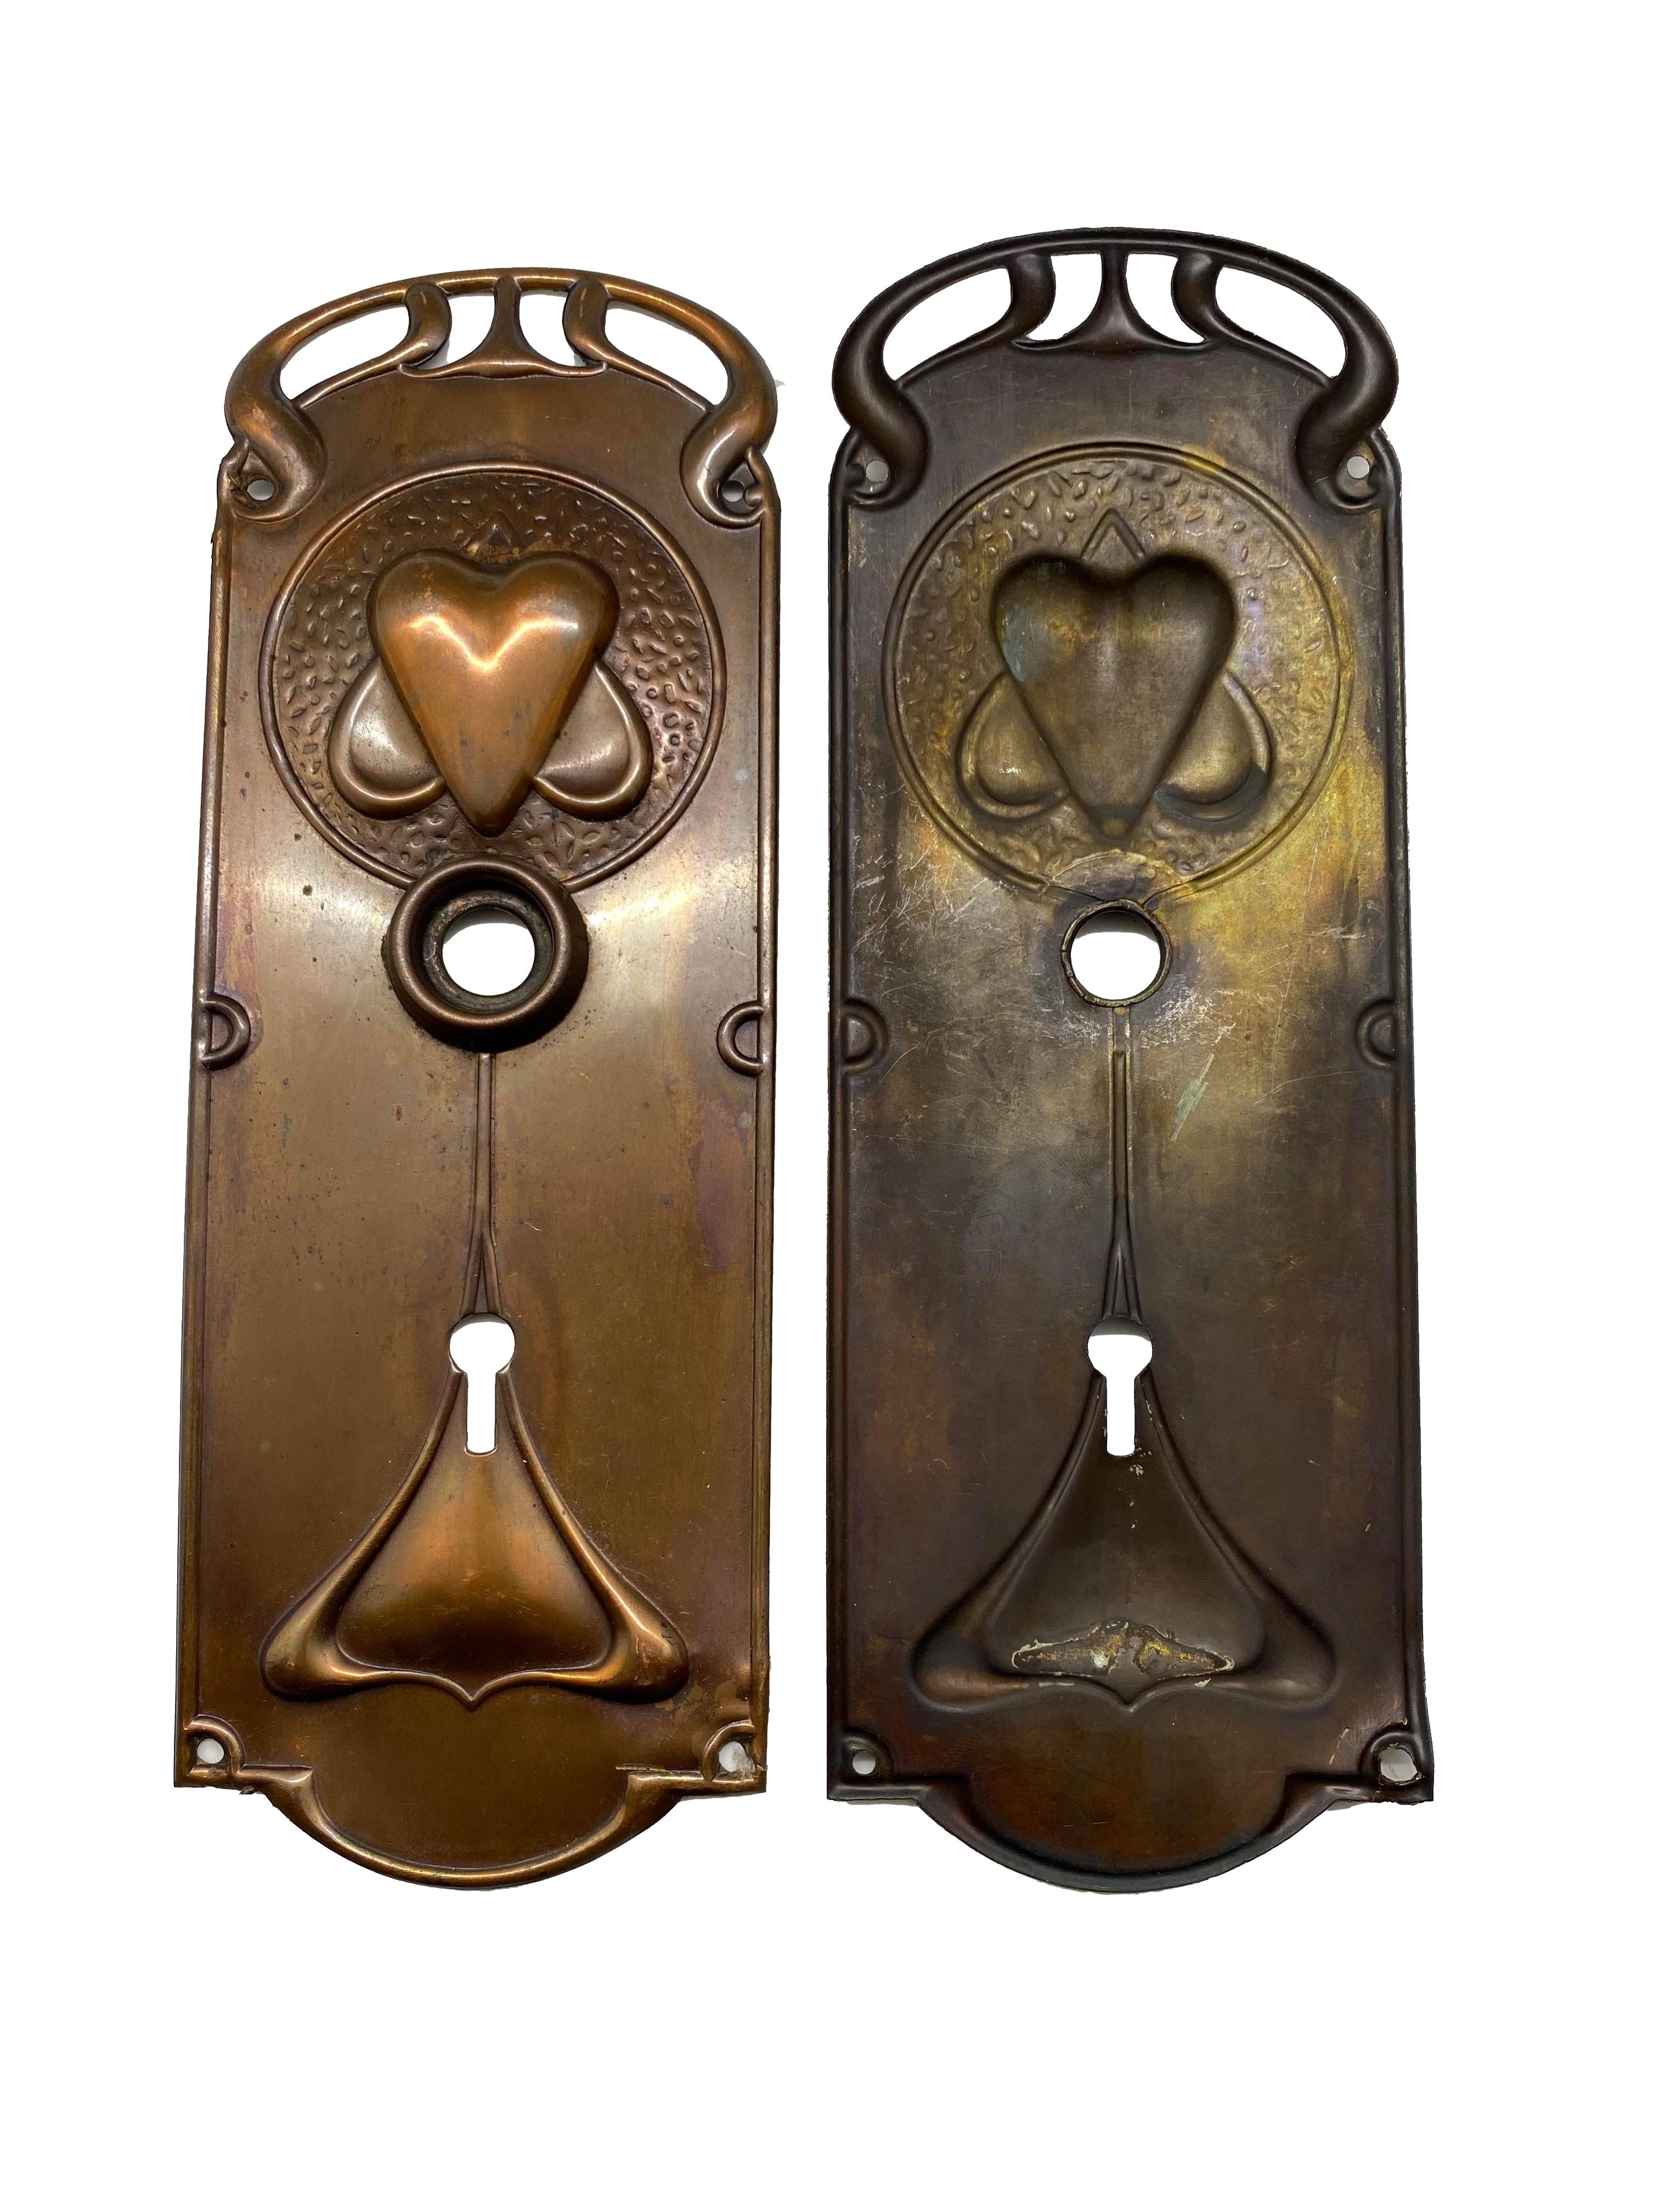 Pair of original Art Nouveau copper doorknobs and doorplates. Set includes 15 pieces: two knobs, two doorplates, a mortise lock, a strike plate, a spindle with two set screws, and six screws.